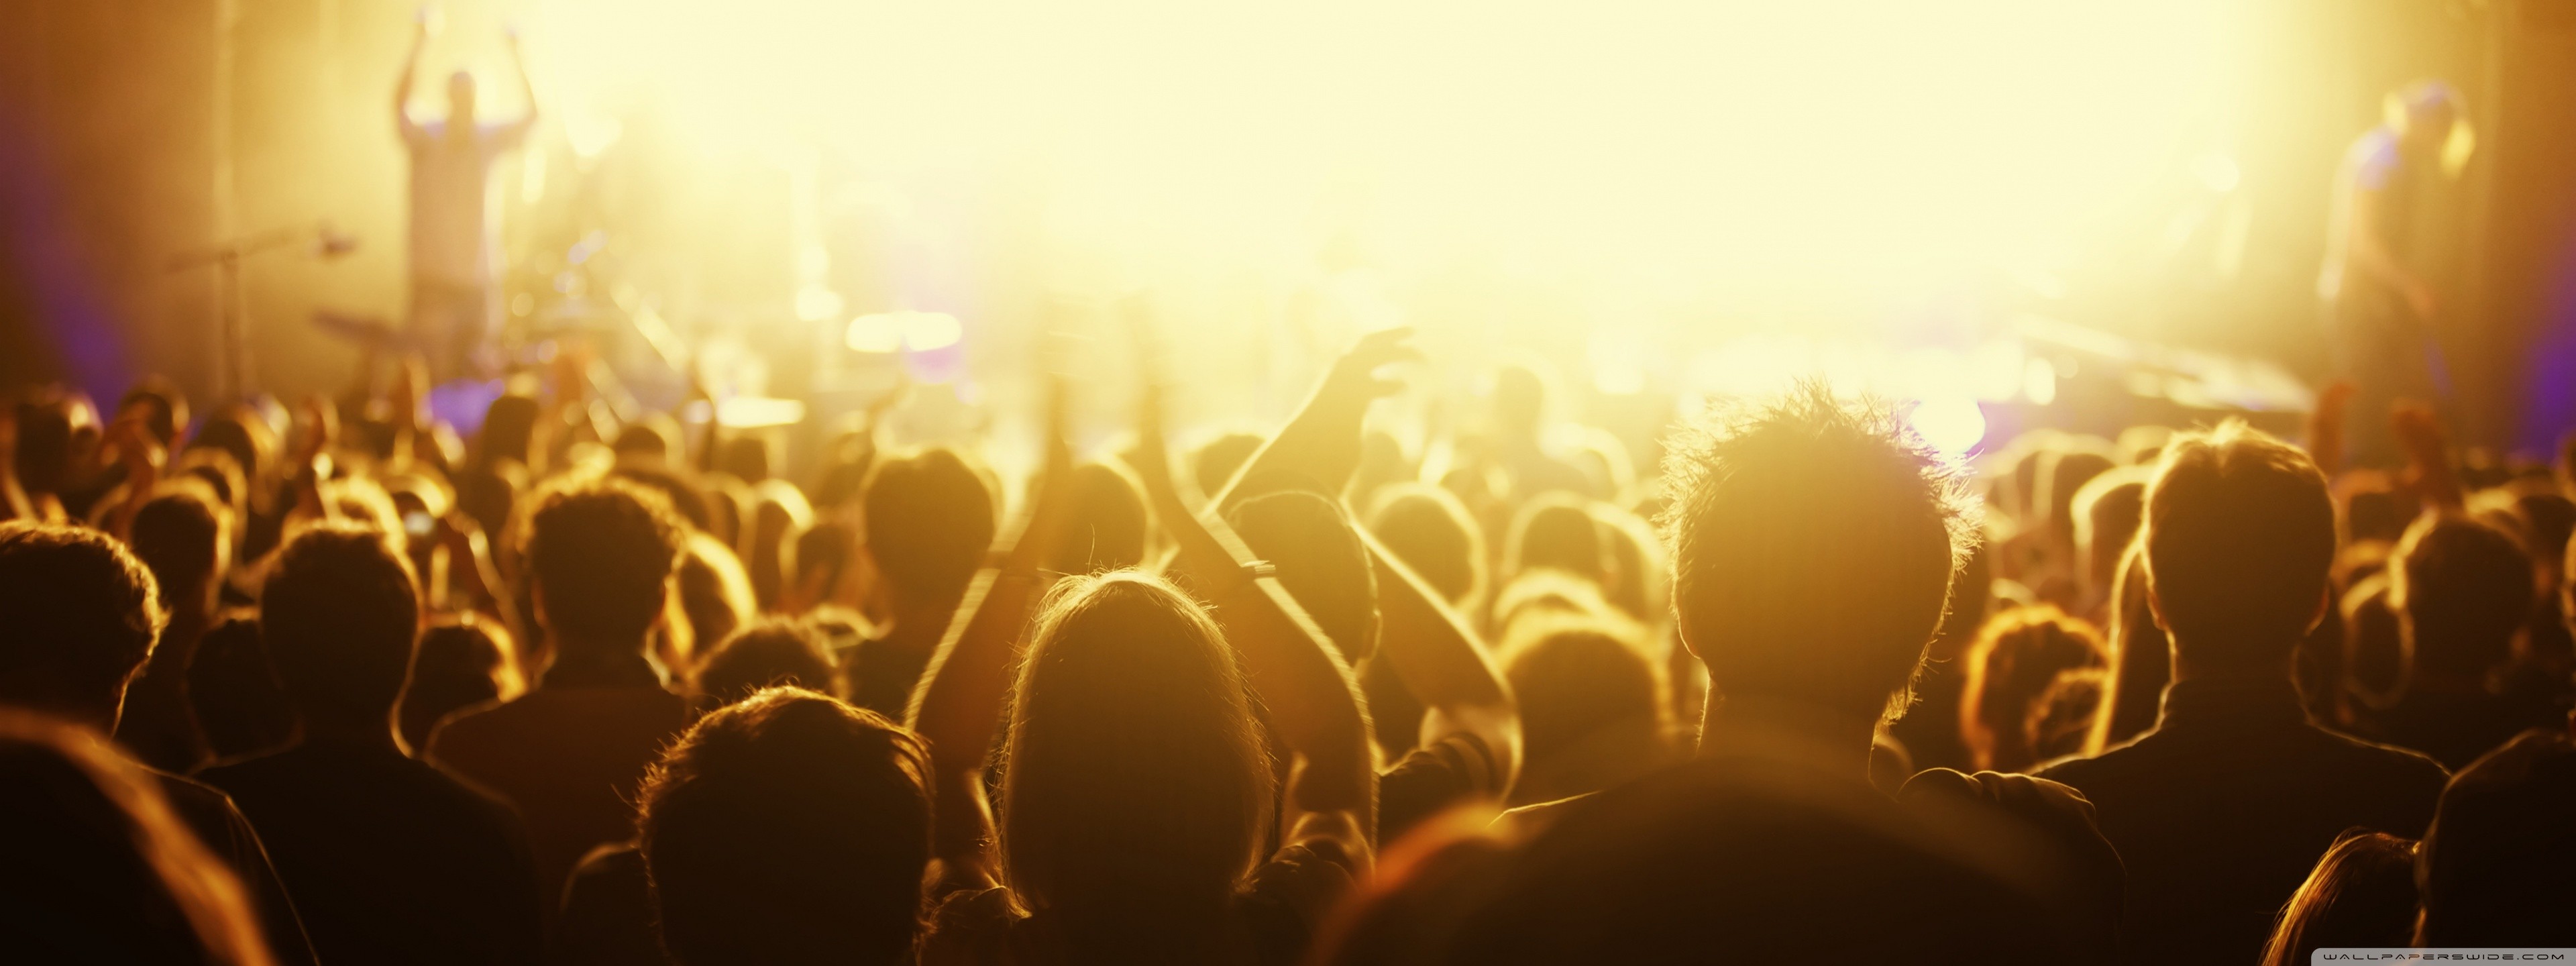 3840x1440 Tag: HD Quality Concert Wallpapers, Backgrounds and Pictures for Free,  Collen Sepulveda